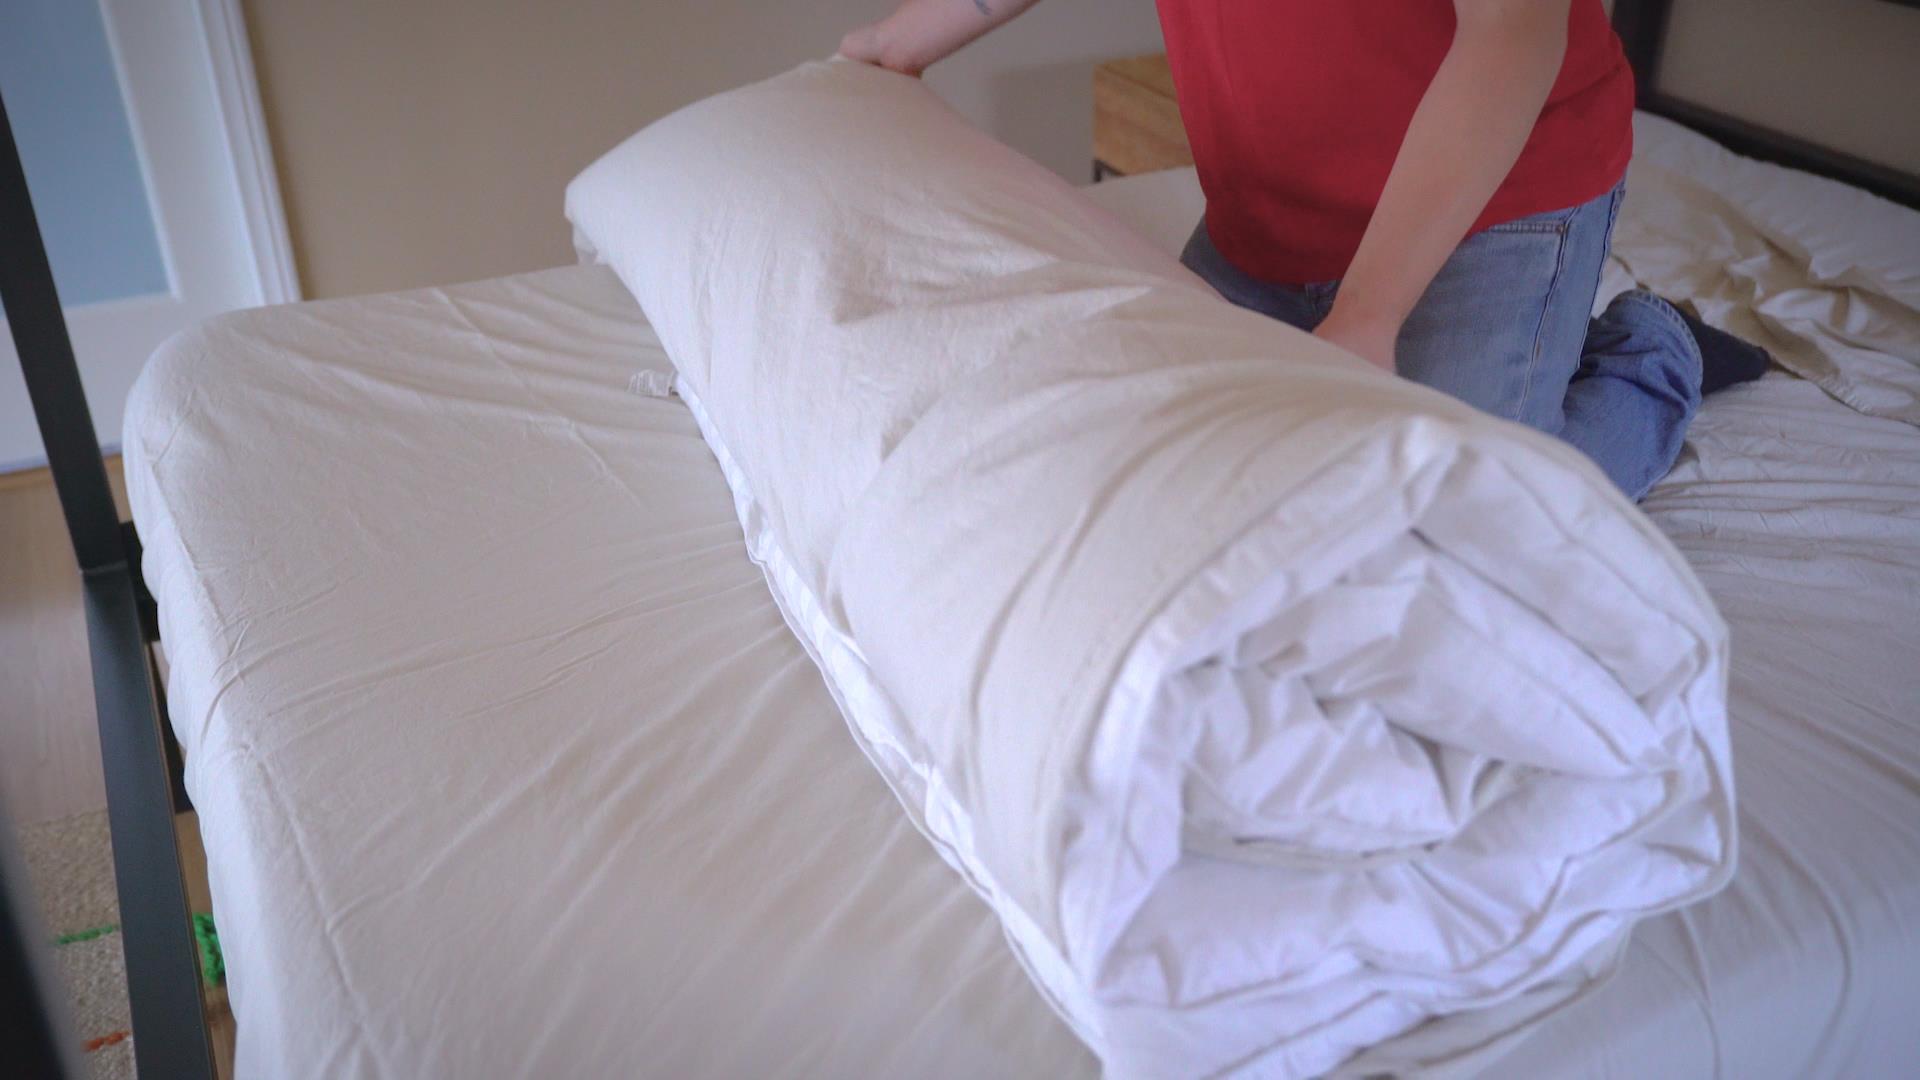 How To Wash A Duvet The Best Tips, Can You Steam Clean A Down Duvet Cover